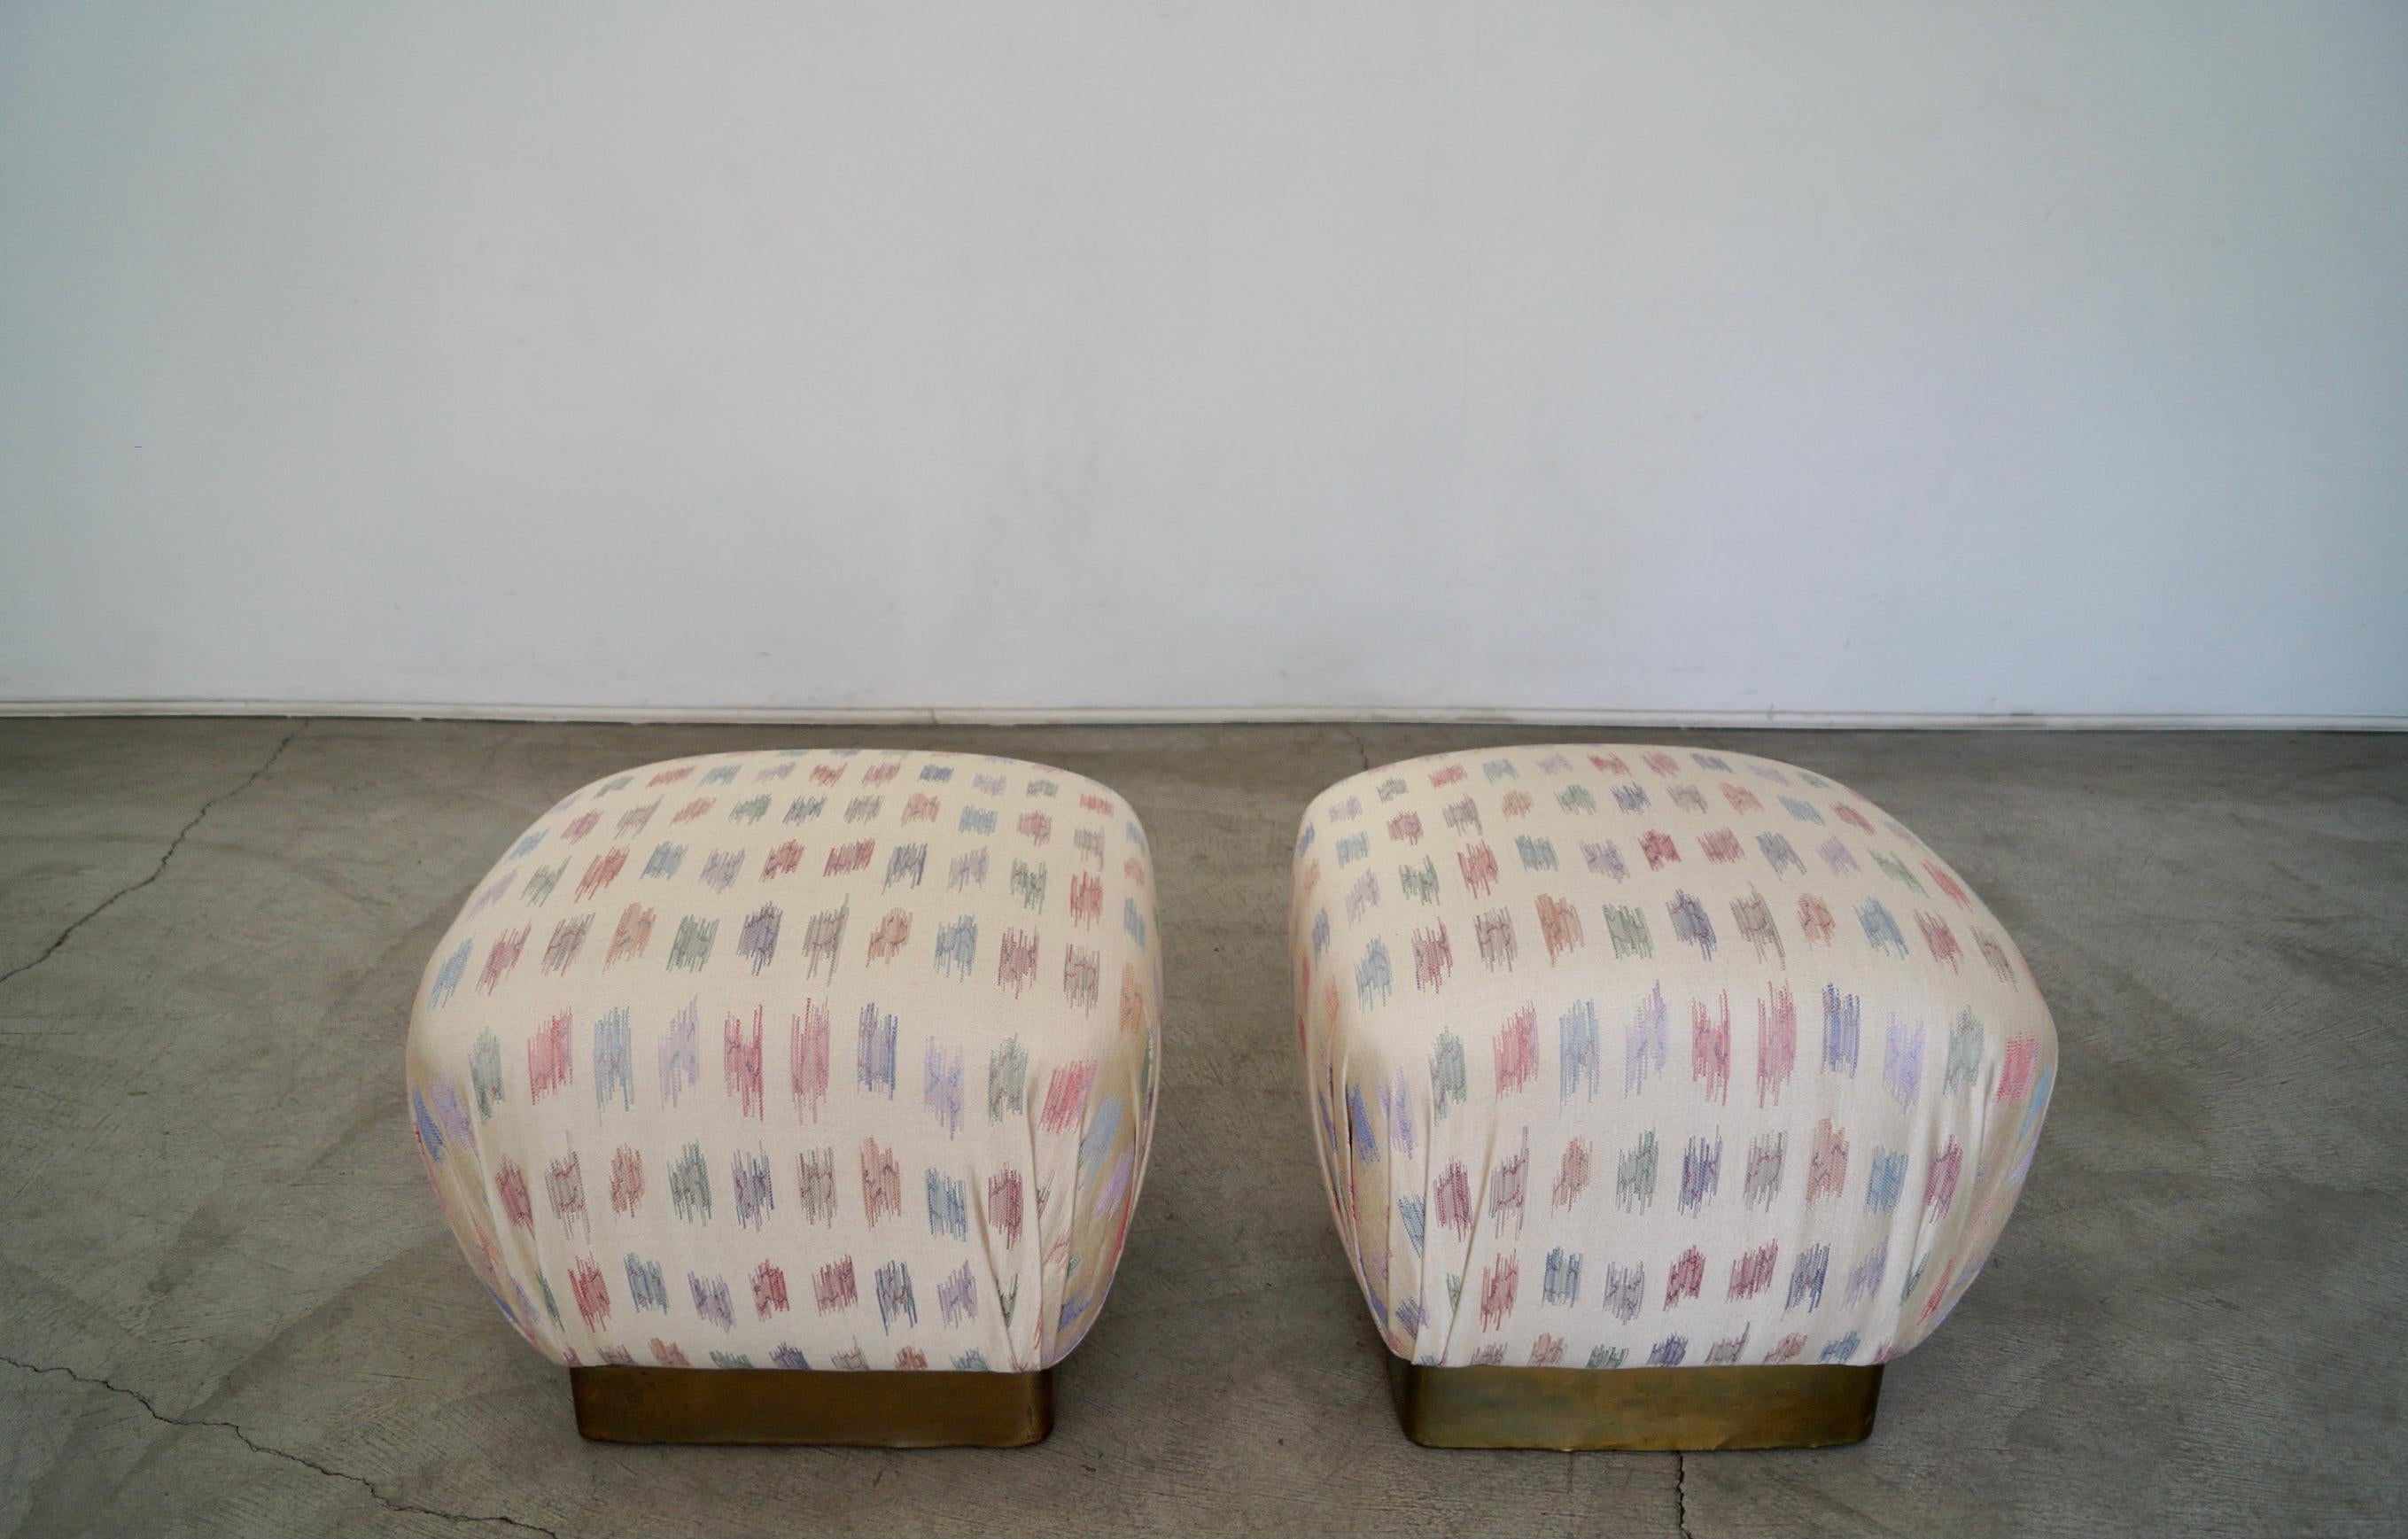 Pair of vintage Hollywood Regency ottoman poufs for sale. Manufactured in the 1970's by Marge Carson, and have been reupholstered in a beautiful designer fabric. They have a brass plinth base, and came out beautifully. The brass has aged